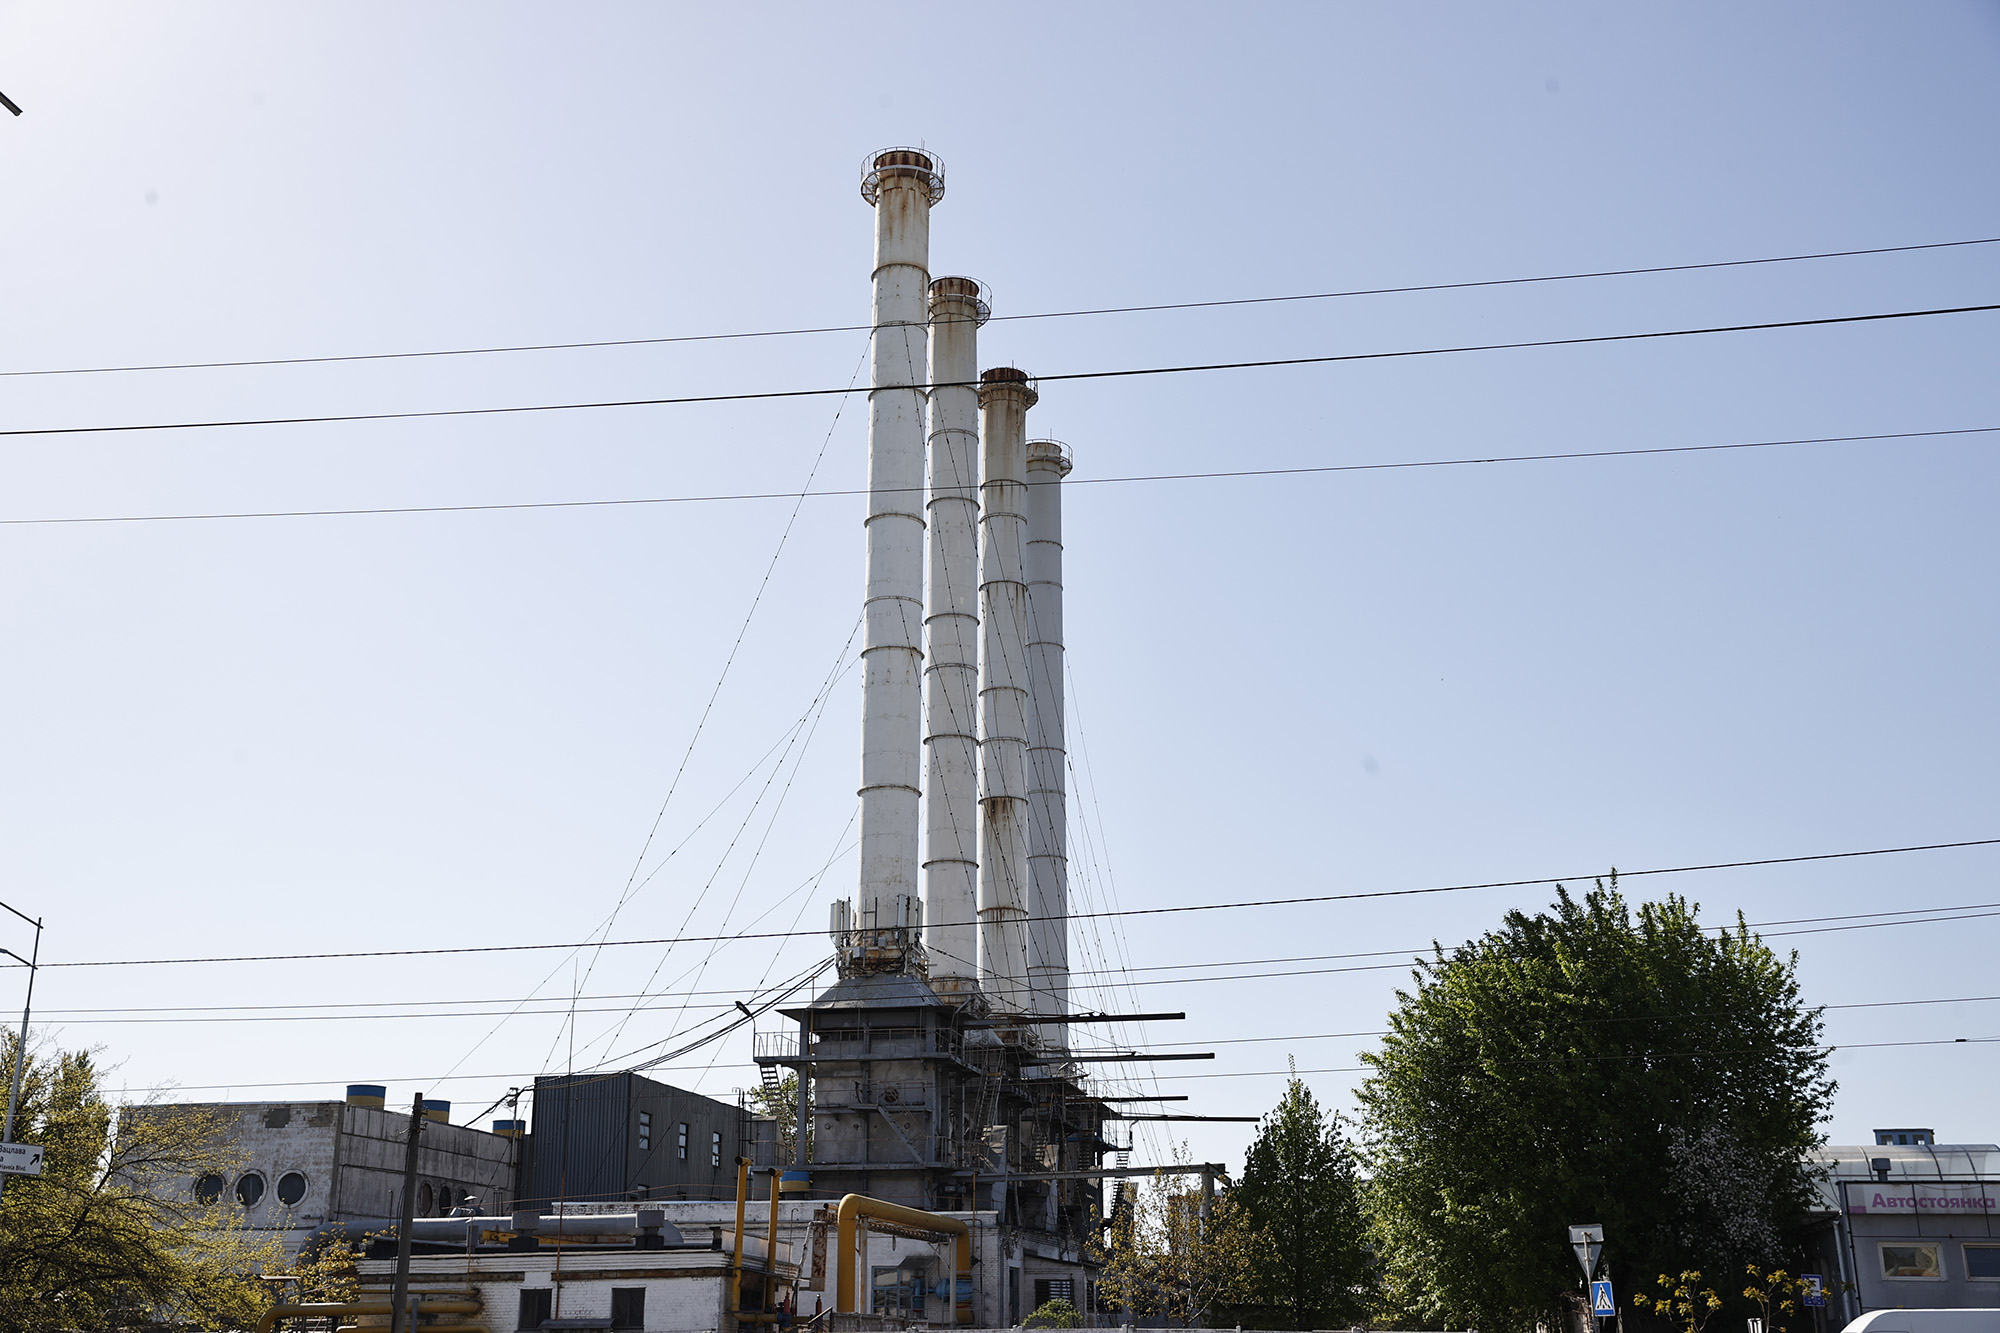 The factory chimneys of the Ukrainian Gas Transmission System Operator (GTSOU) in Kyiv, Ukraine, on May 11.